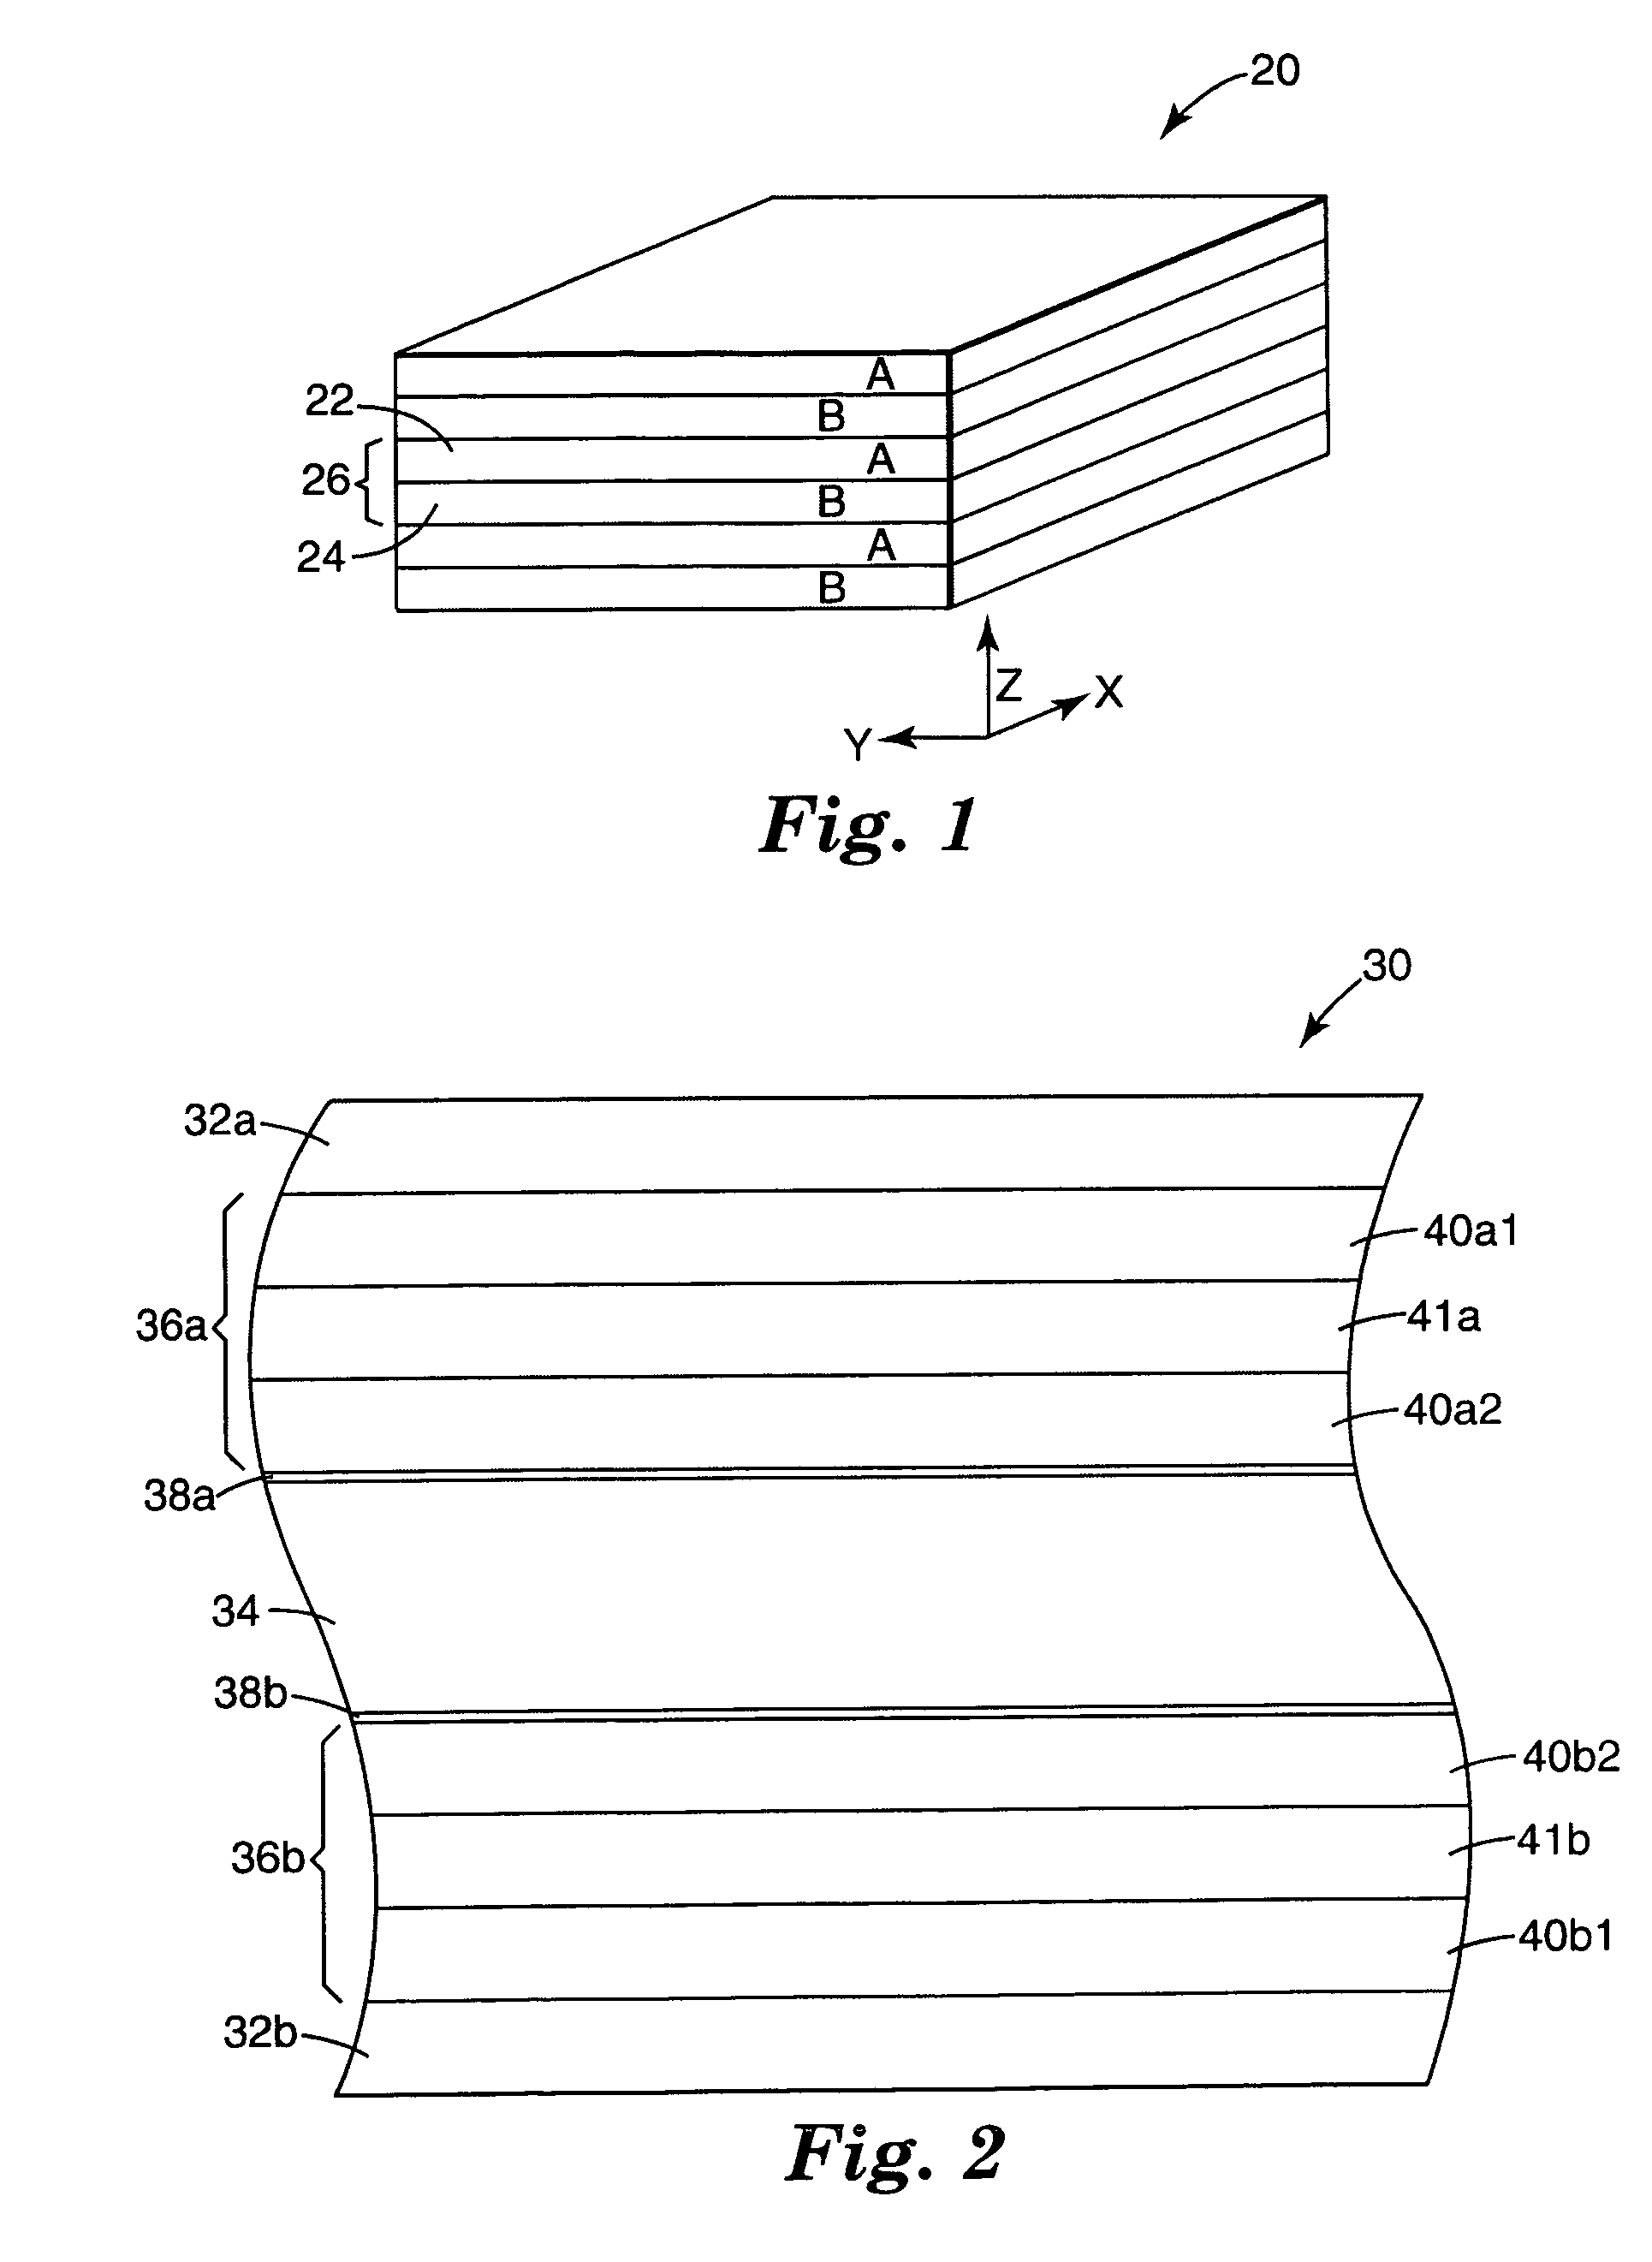 Cards and laminates incorporating multilayer optical films